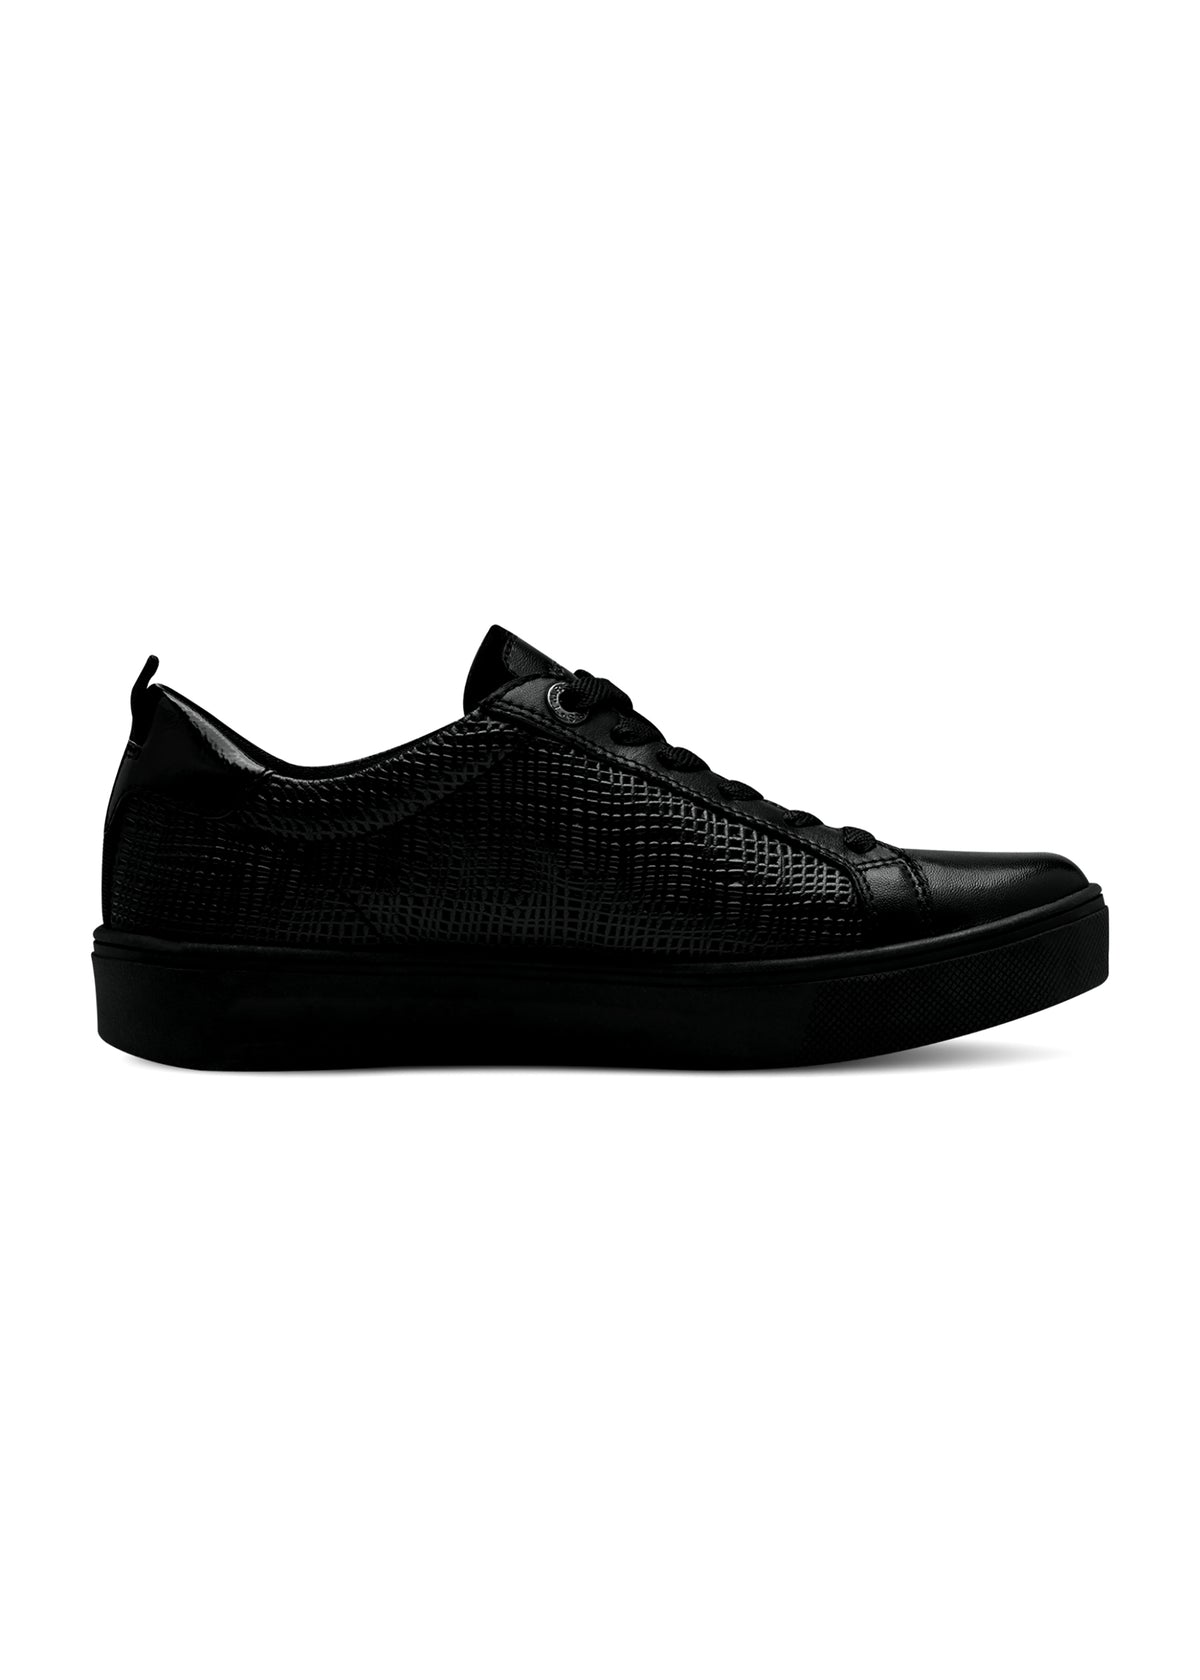 Sneakers - black textured leather